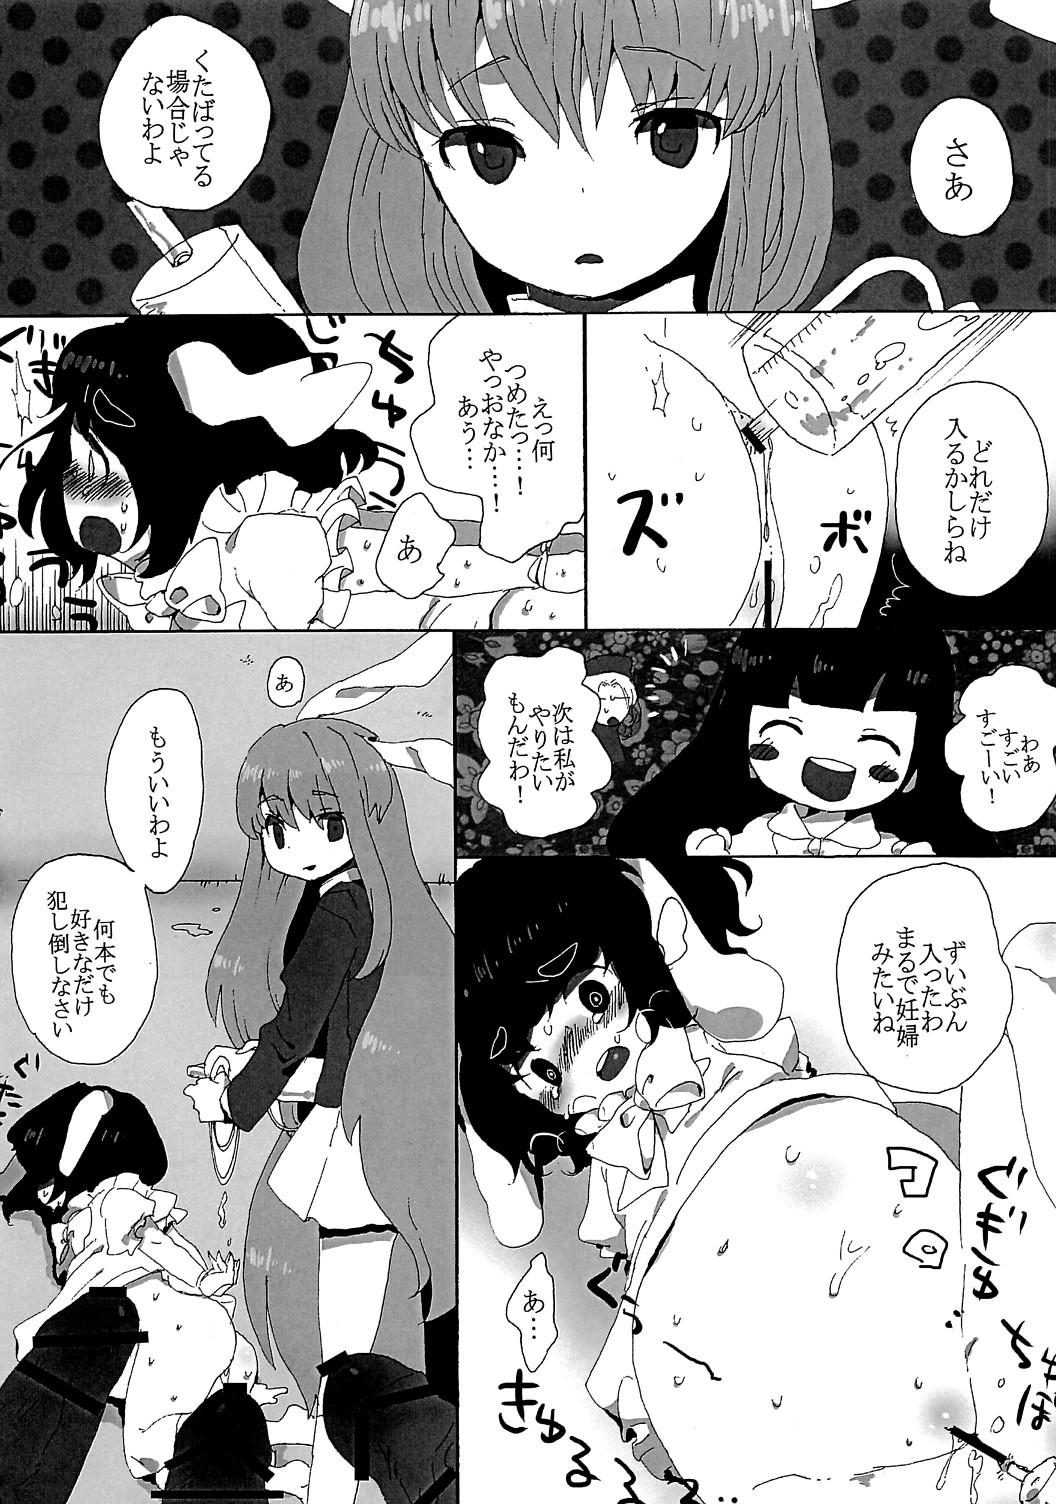 Publico rumor the second - Touhou project Gaybukkake - Page 8